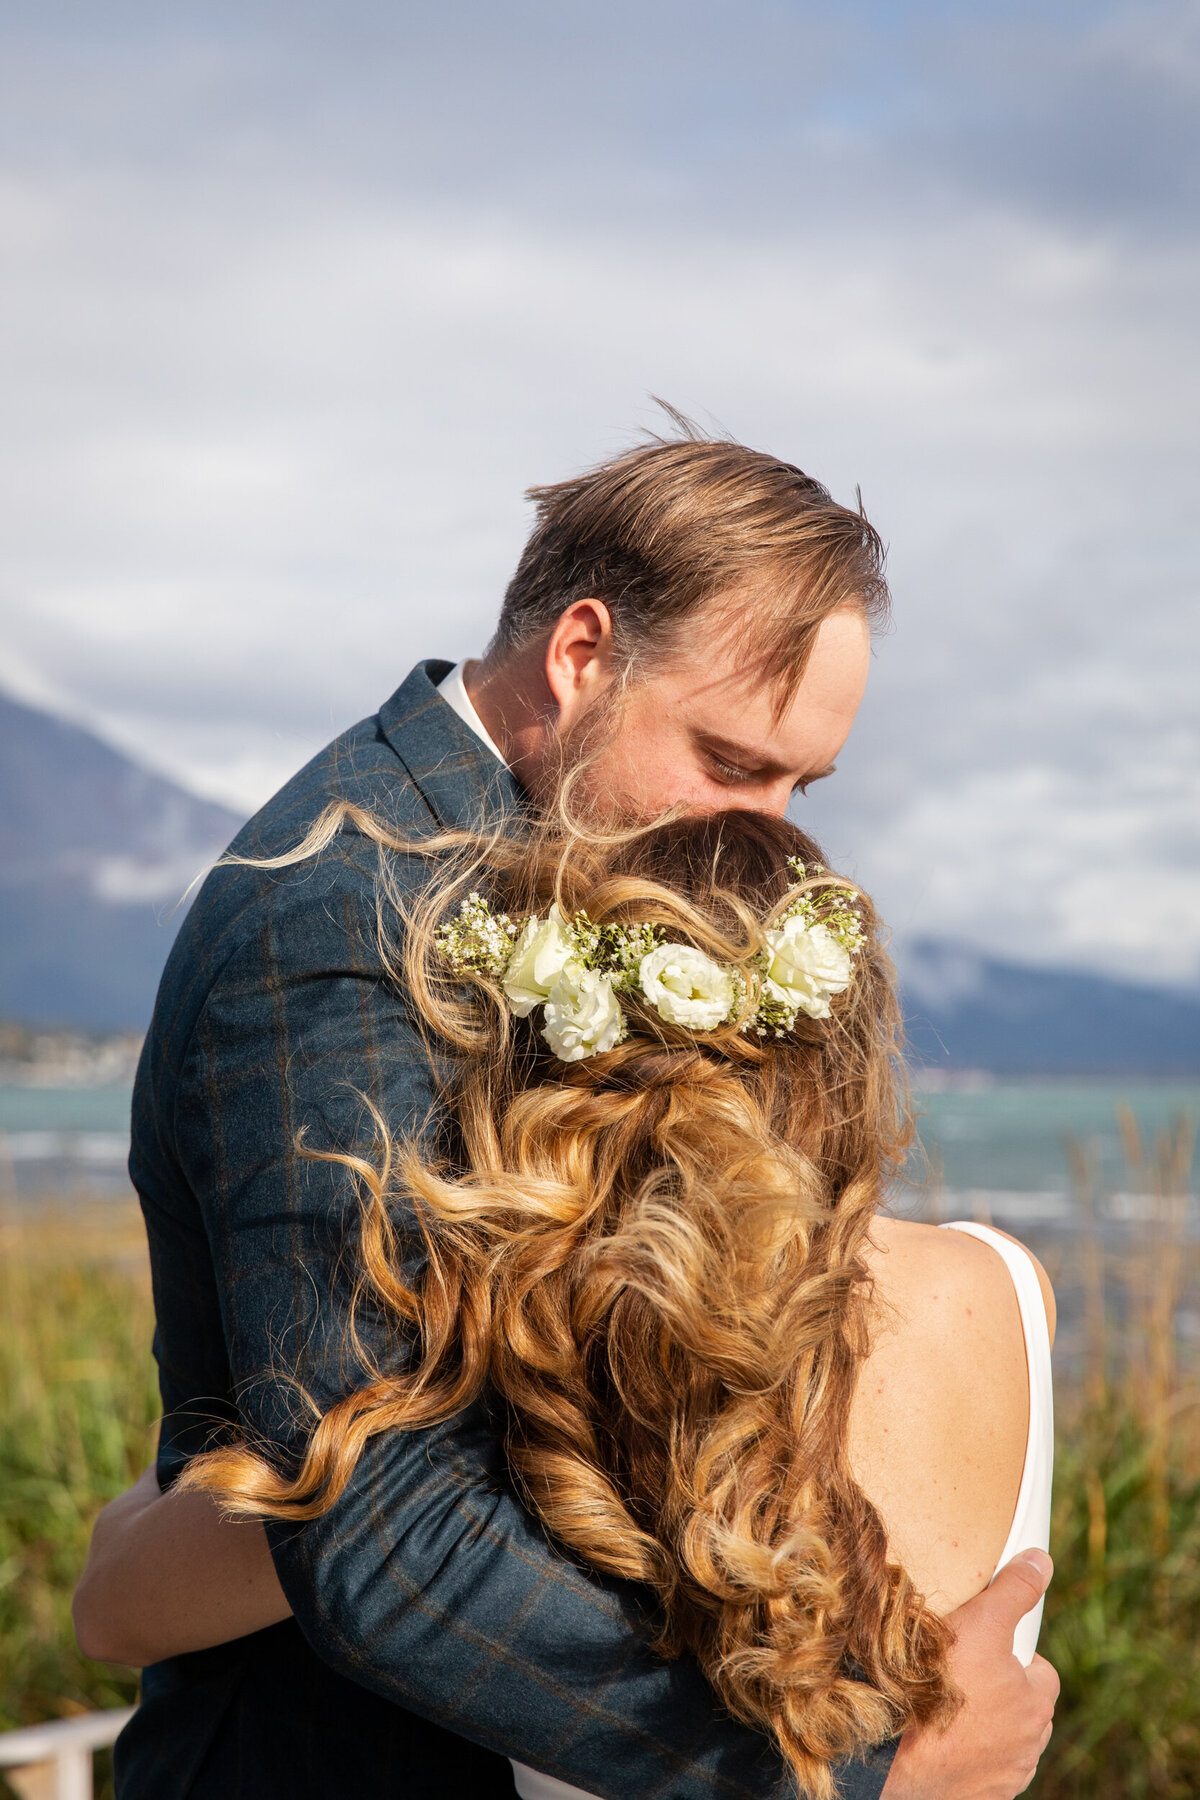 A groom kisses his bride's forehead as she leans in for a hug.